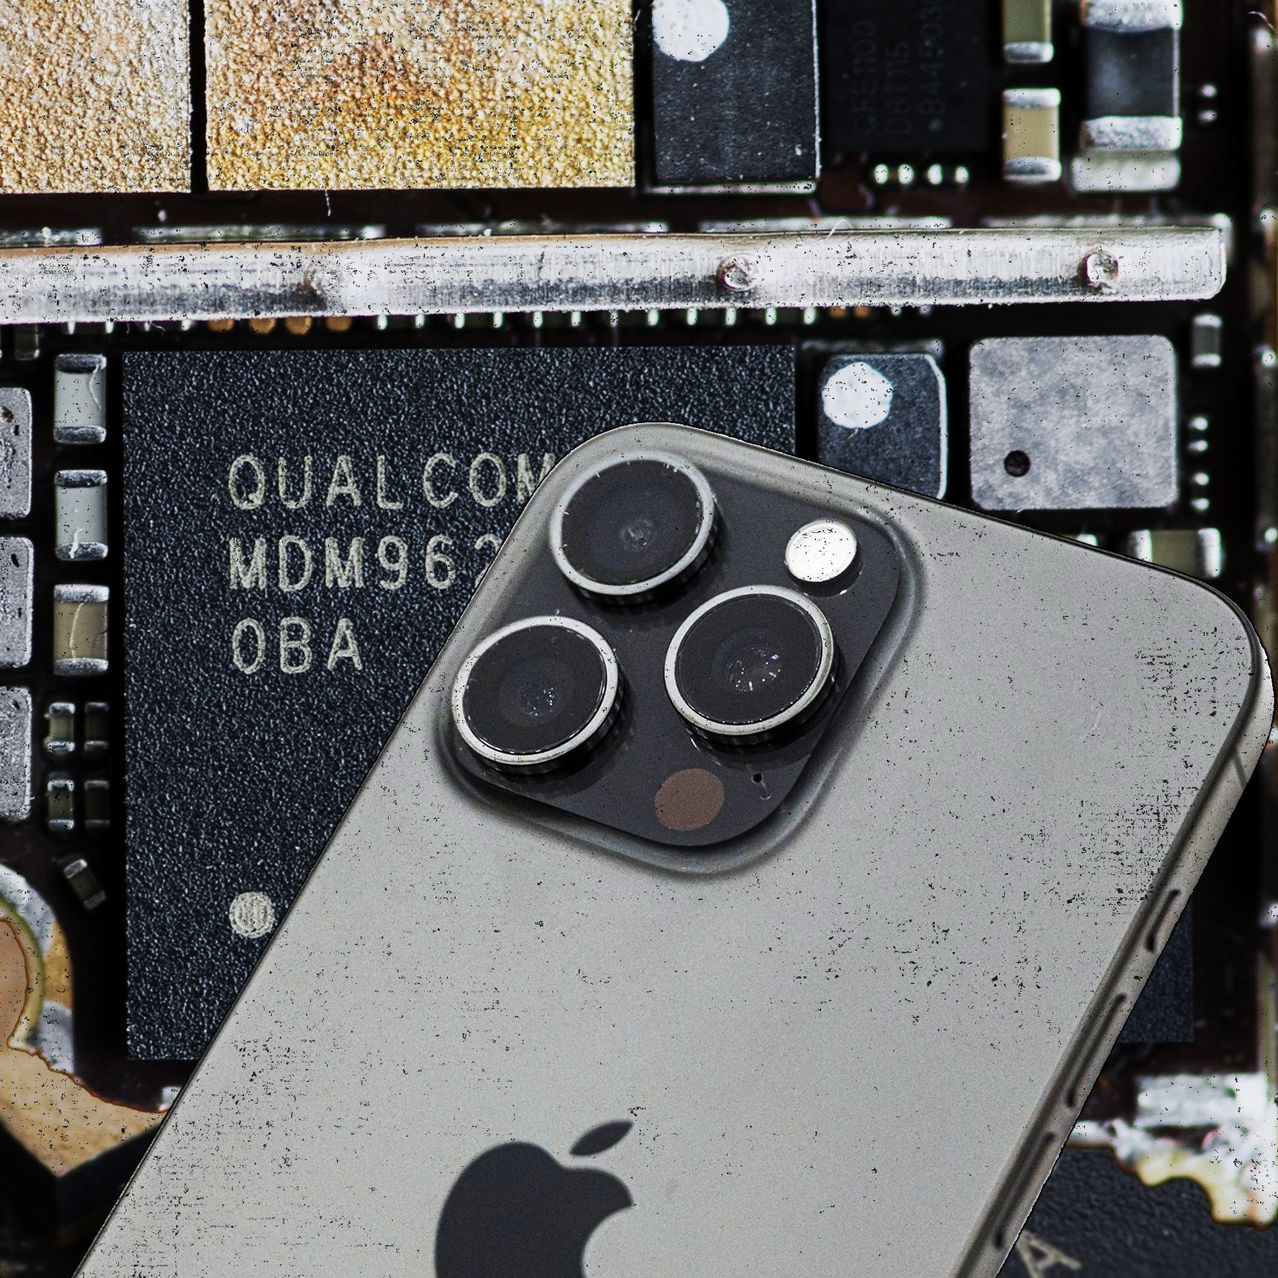 Apple iPhone 15 Pro Max and a Qualcomm modem chip. WSJ; PHOTOS: DAVID PAUL MORRIS/BLOOMBERG; BRENT LEWIN/BLOOMBERG